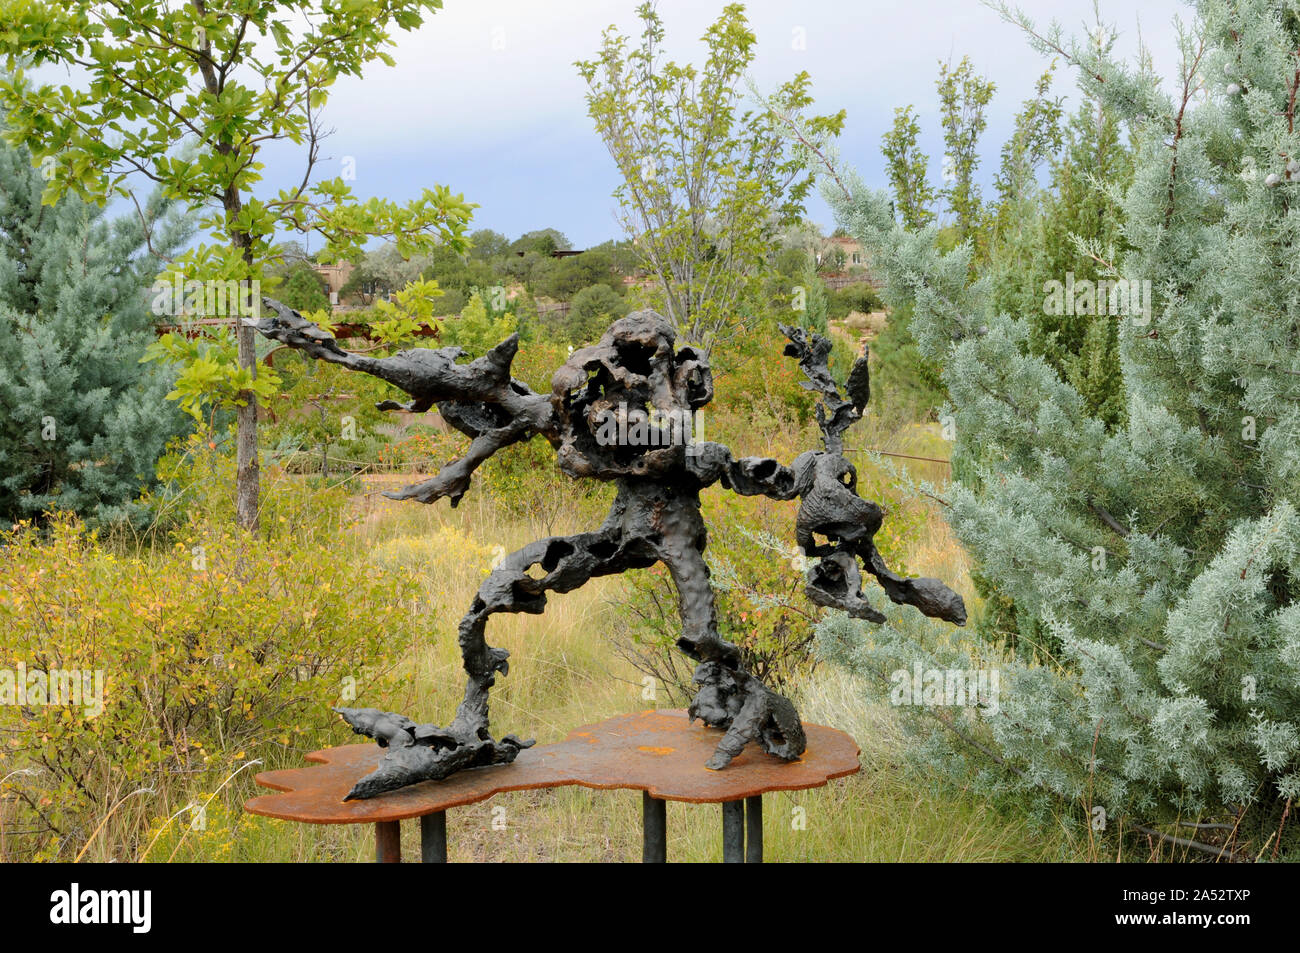 Bronze sculptures in the Santa Fe Botanical Garden. They formed part of an exhibition entitled 'Human Nature.' This work is by Jonathan Hertzel. Stock Photo